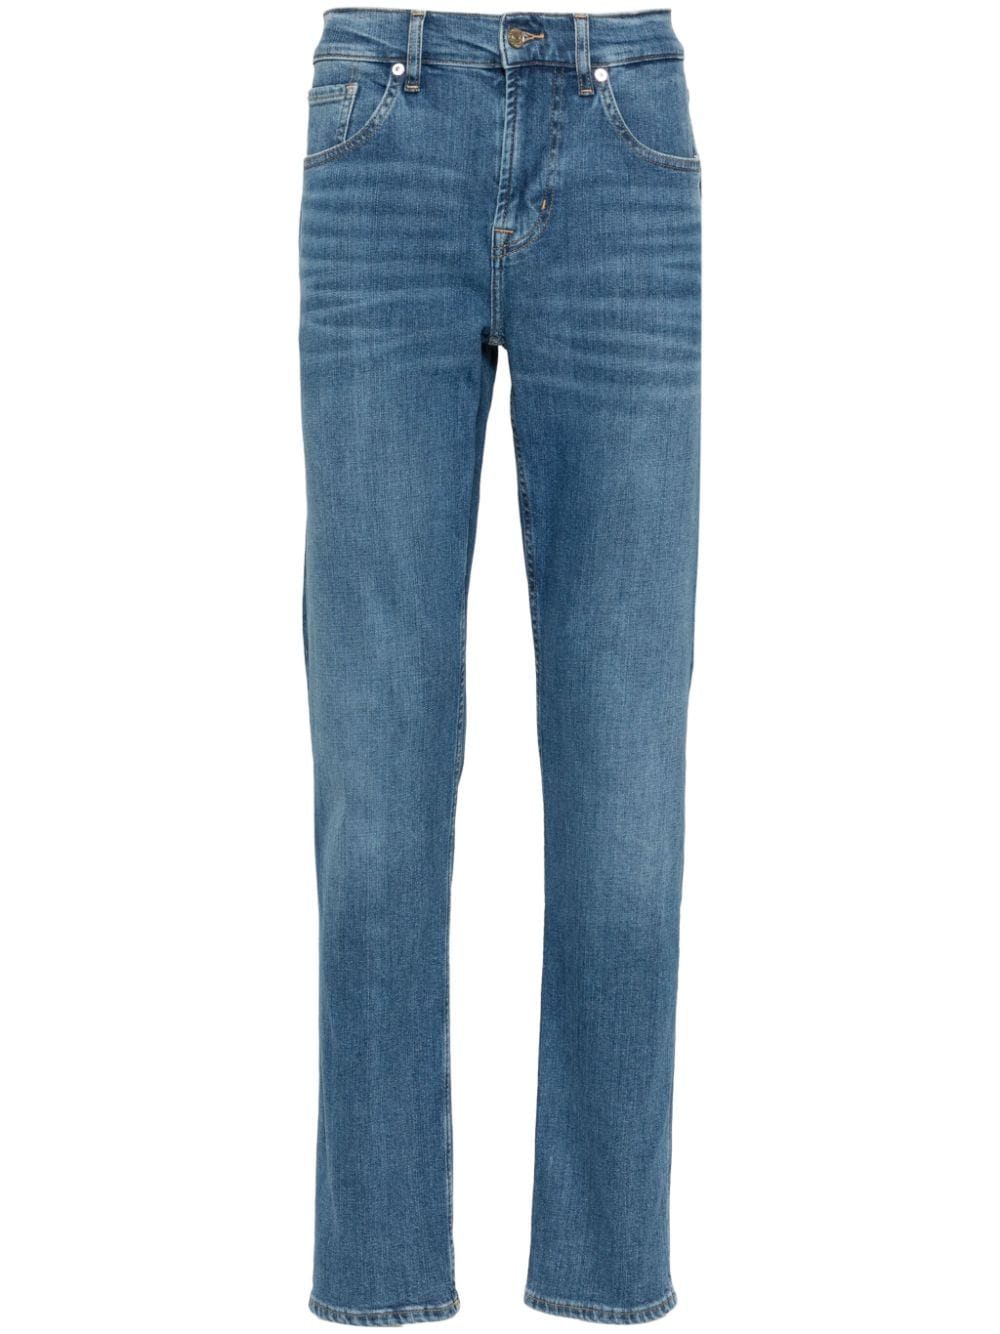 7 For All Mankind Slimmy tapered jeans - Blue von 7 For All Mankind